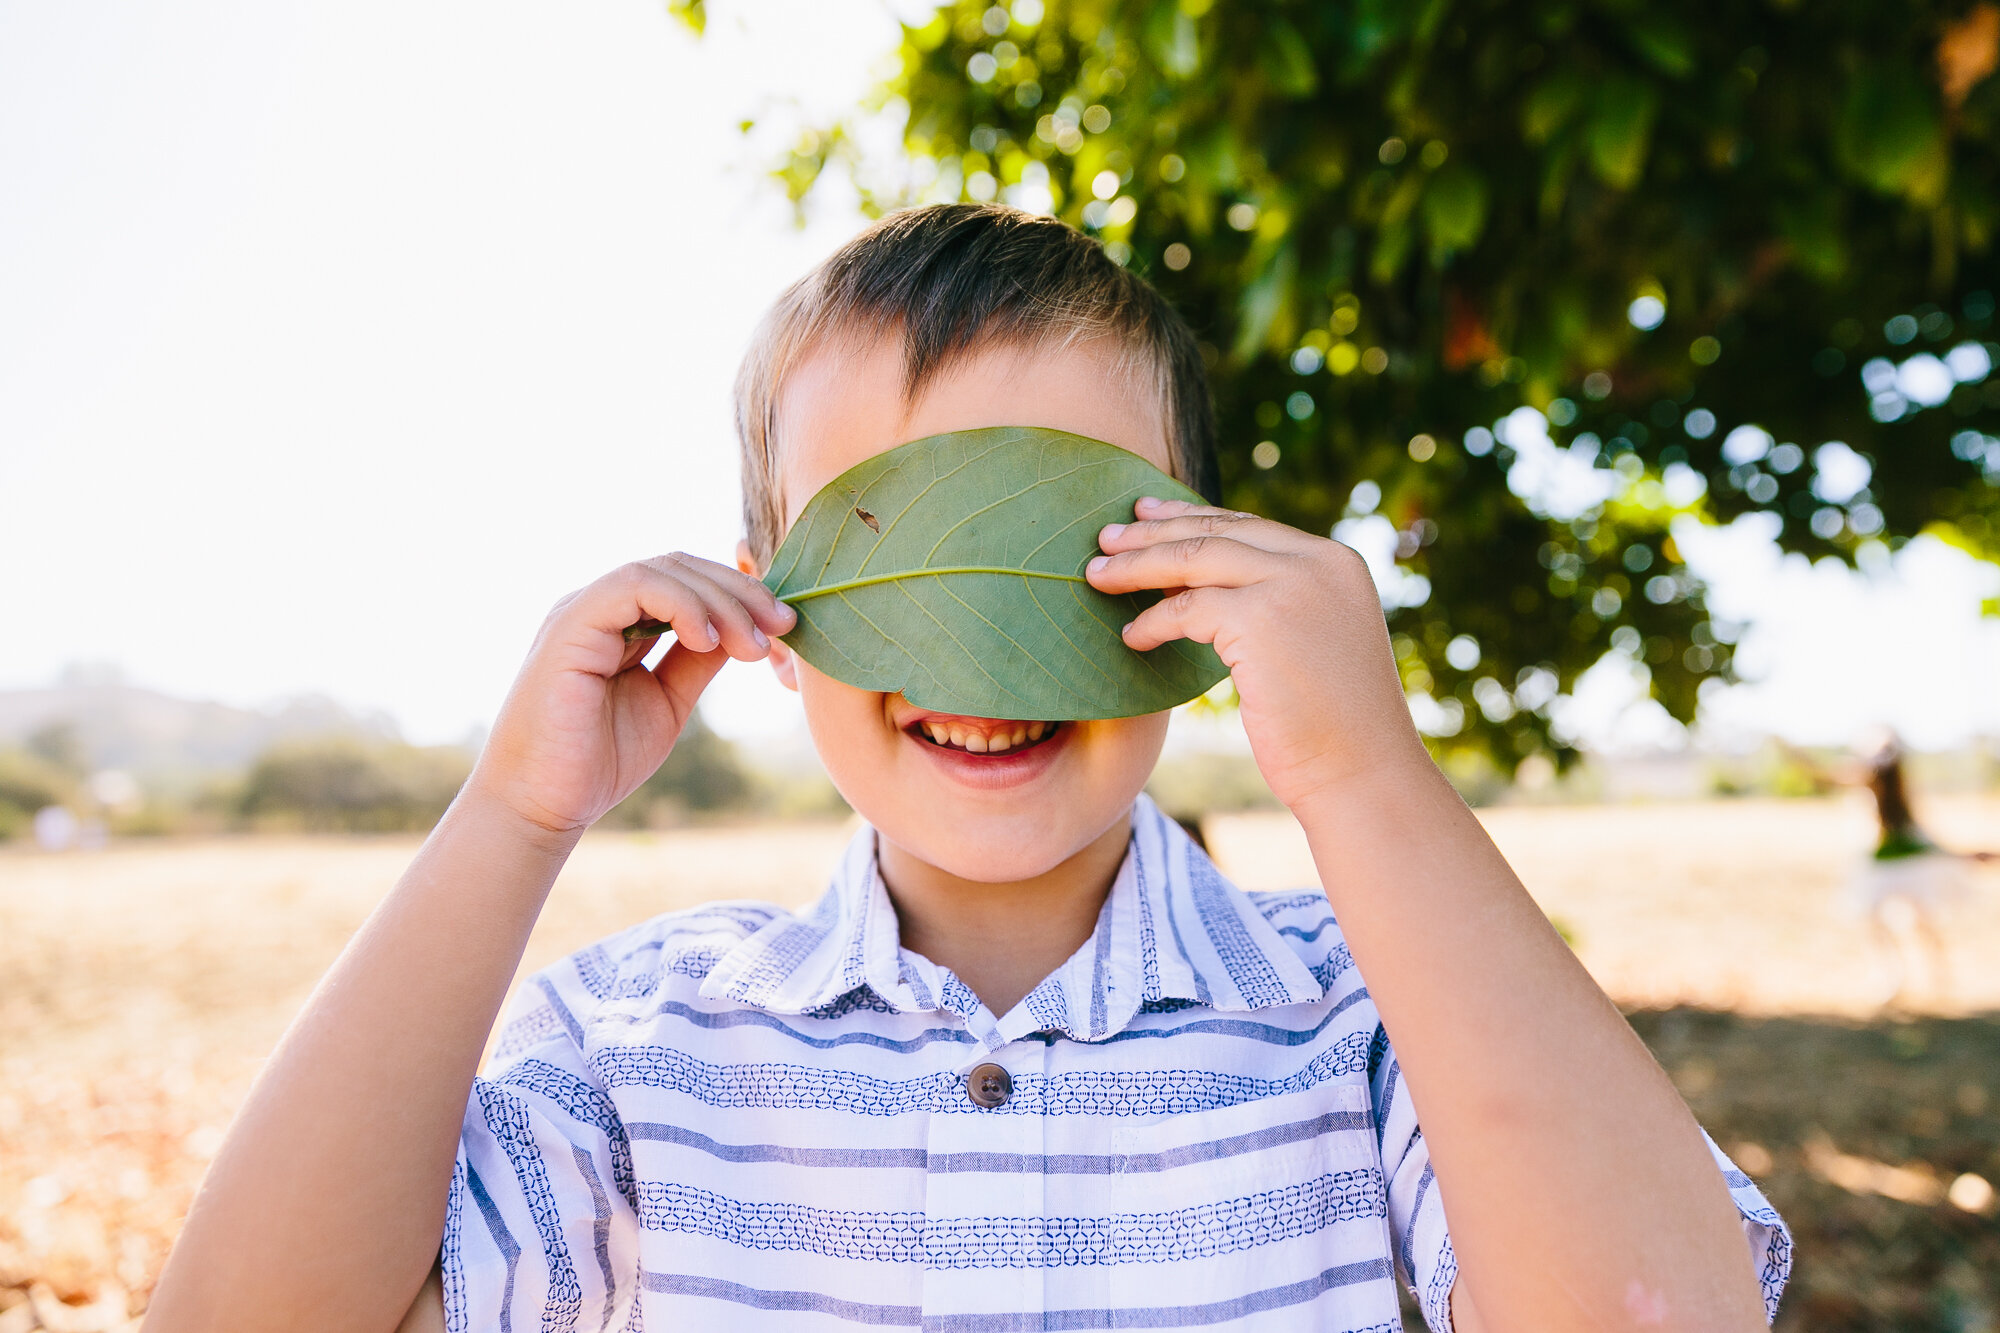 Los_Angeles_Family_Photography_Orange_County_Children_Babies_Field_Farm_Outdoors_Morning_Session_California_Girls_Boys_Kids_Photography-1260.jpg